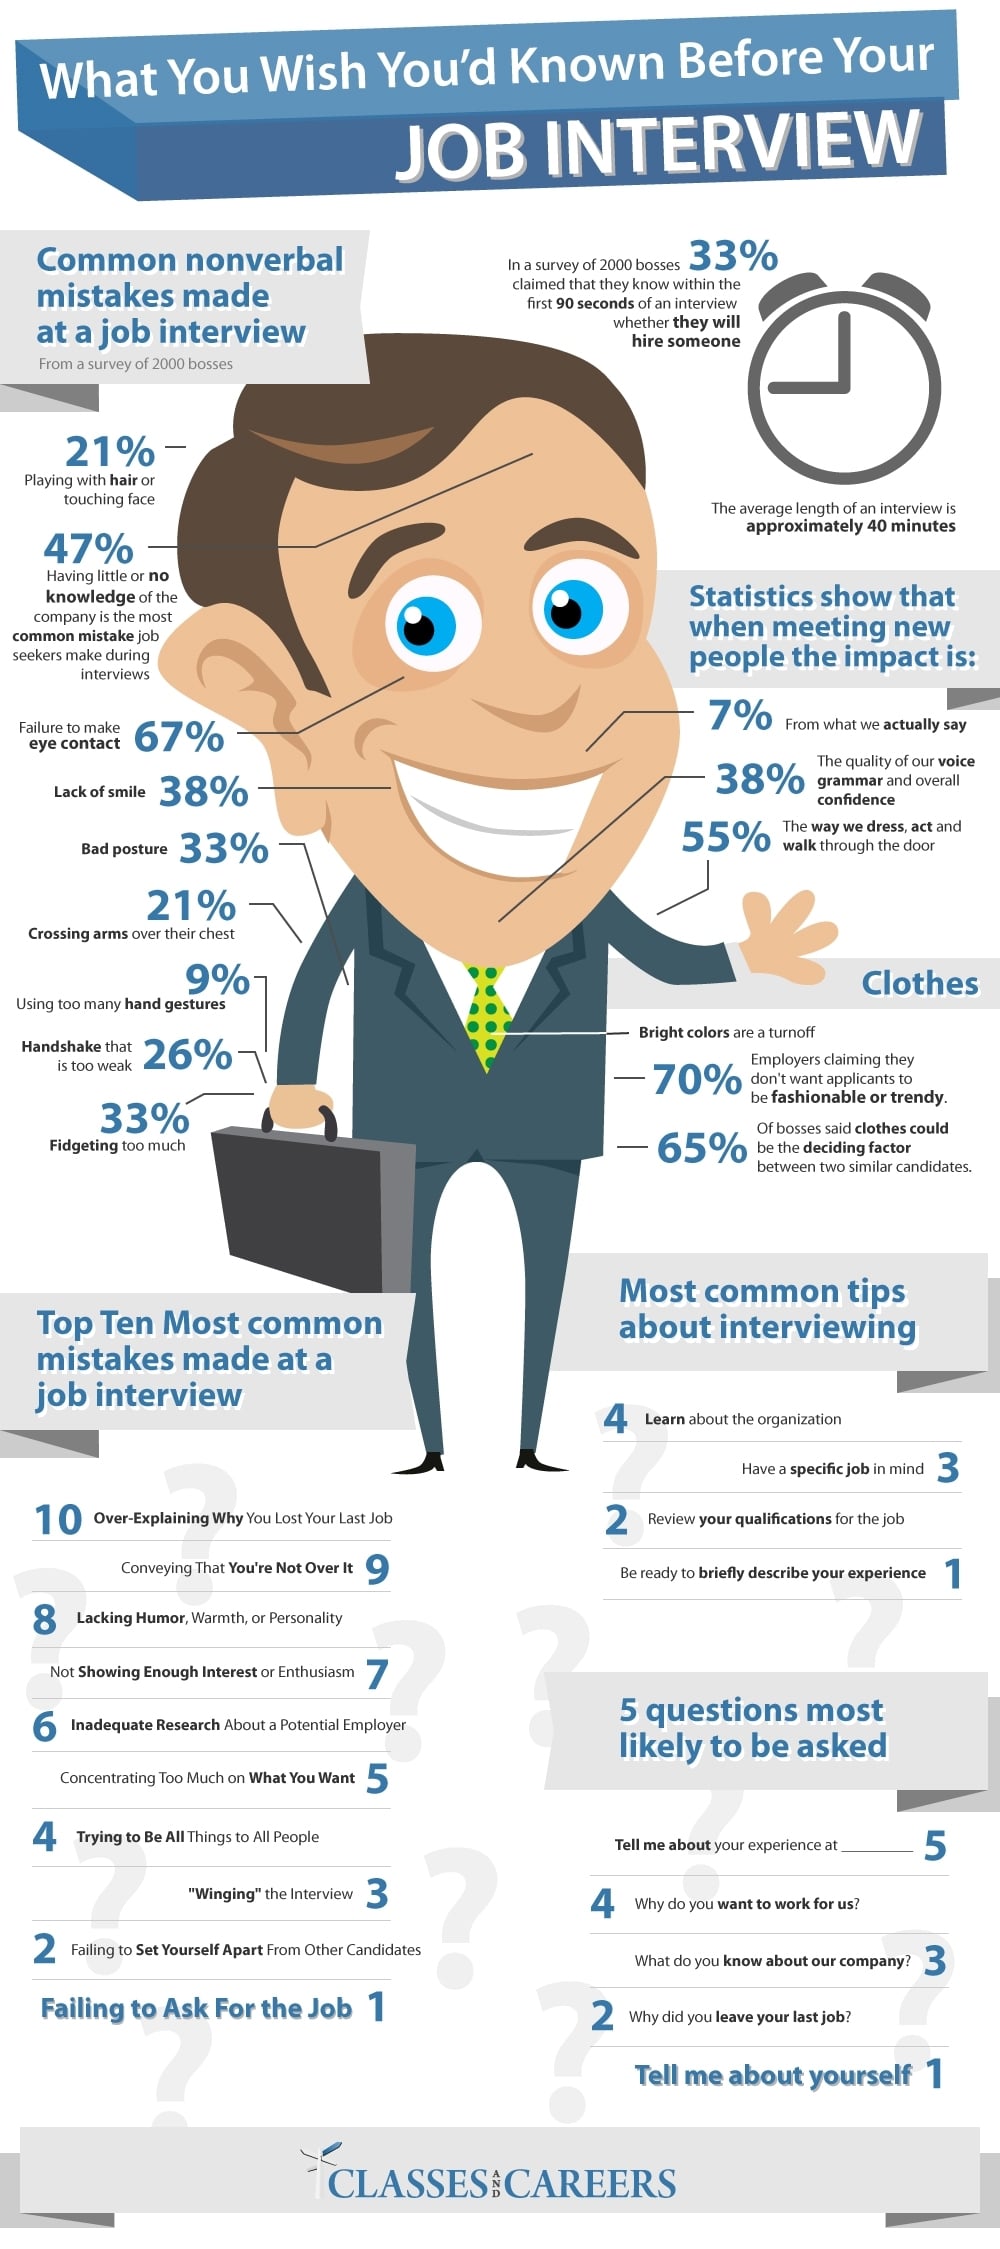 Things To Know Before Your Job Interview [Infographic]